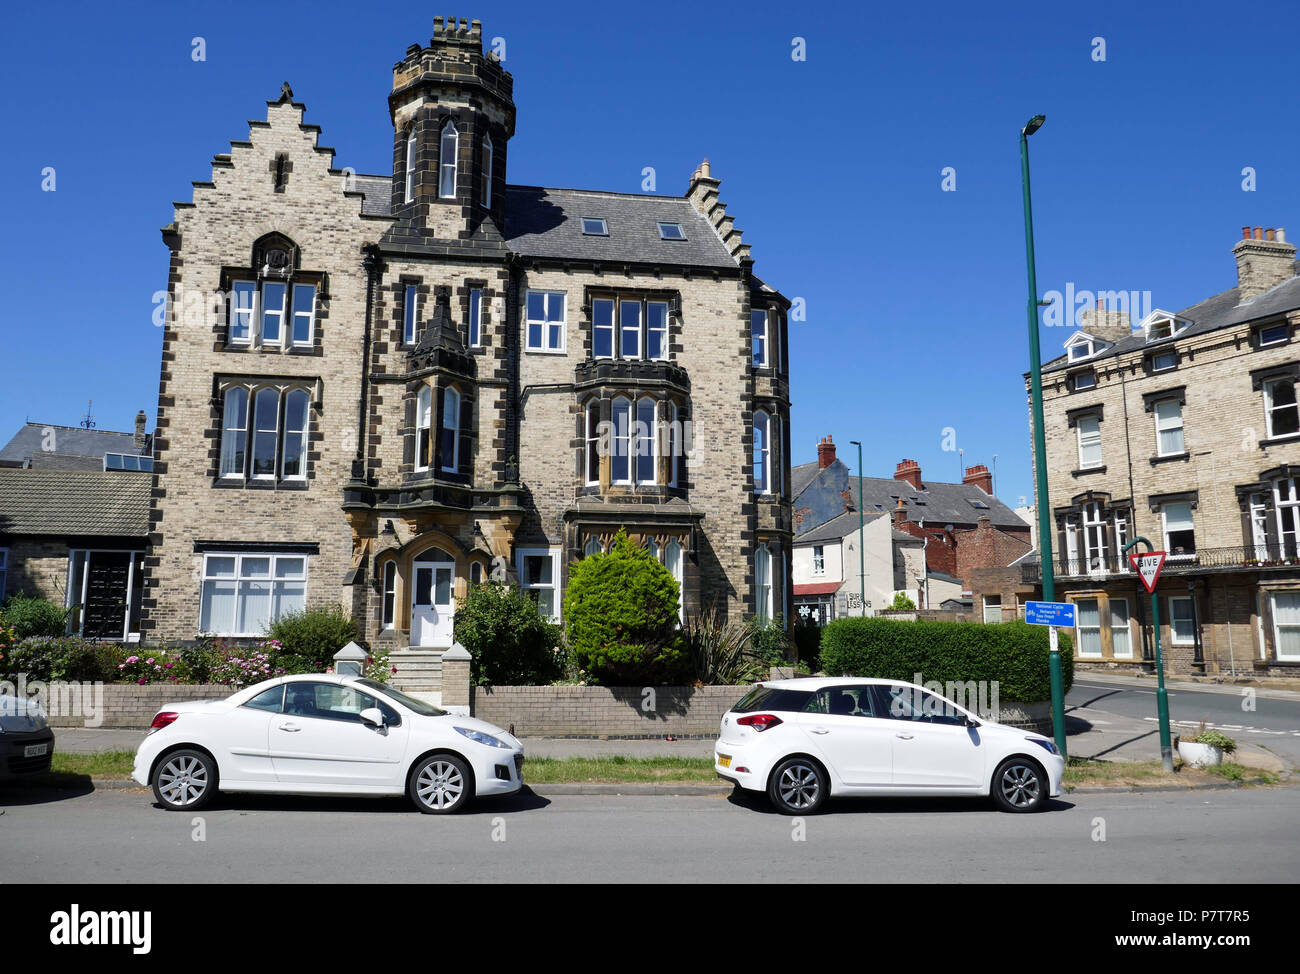 Impressive Victorian buildings in Saltburn by the Sea, family holiday destination, North Yorkshire, England, UK Stock Photo